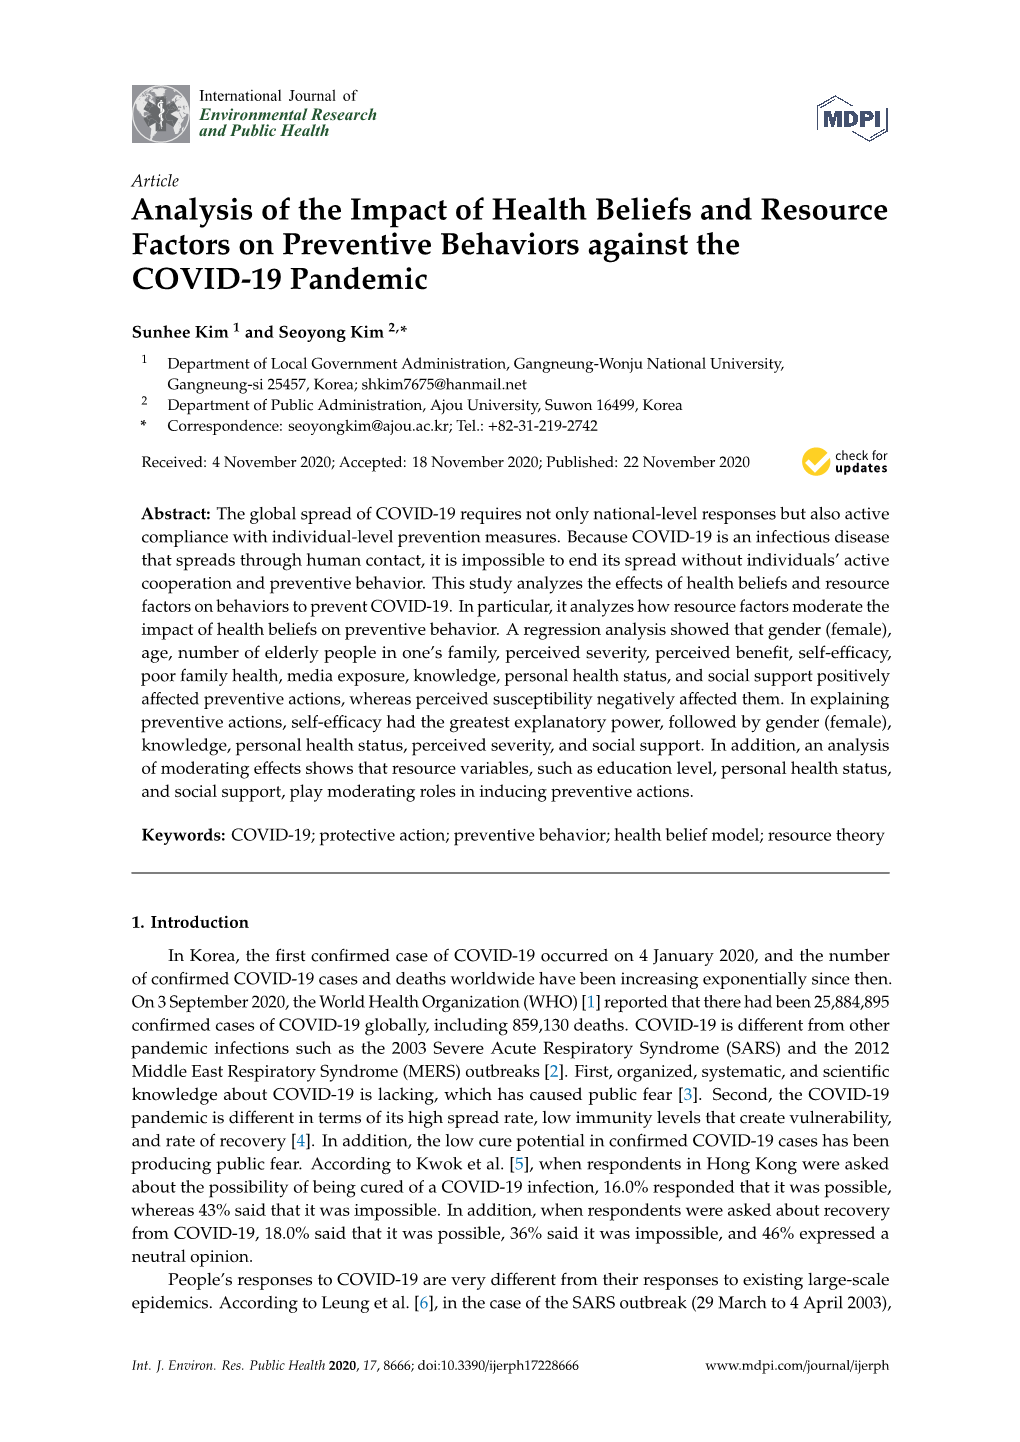 Analysis of the Impact of Health Beliefs and Resource Factors on Preventive Behaviors Against the COVID-19 Pandemic